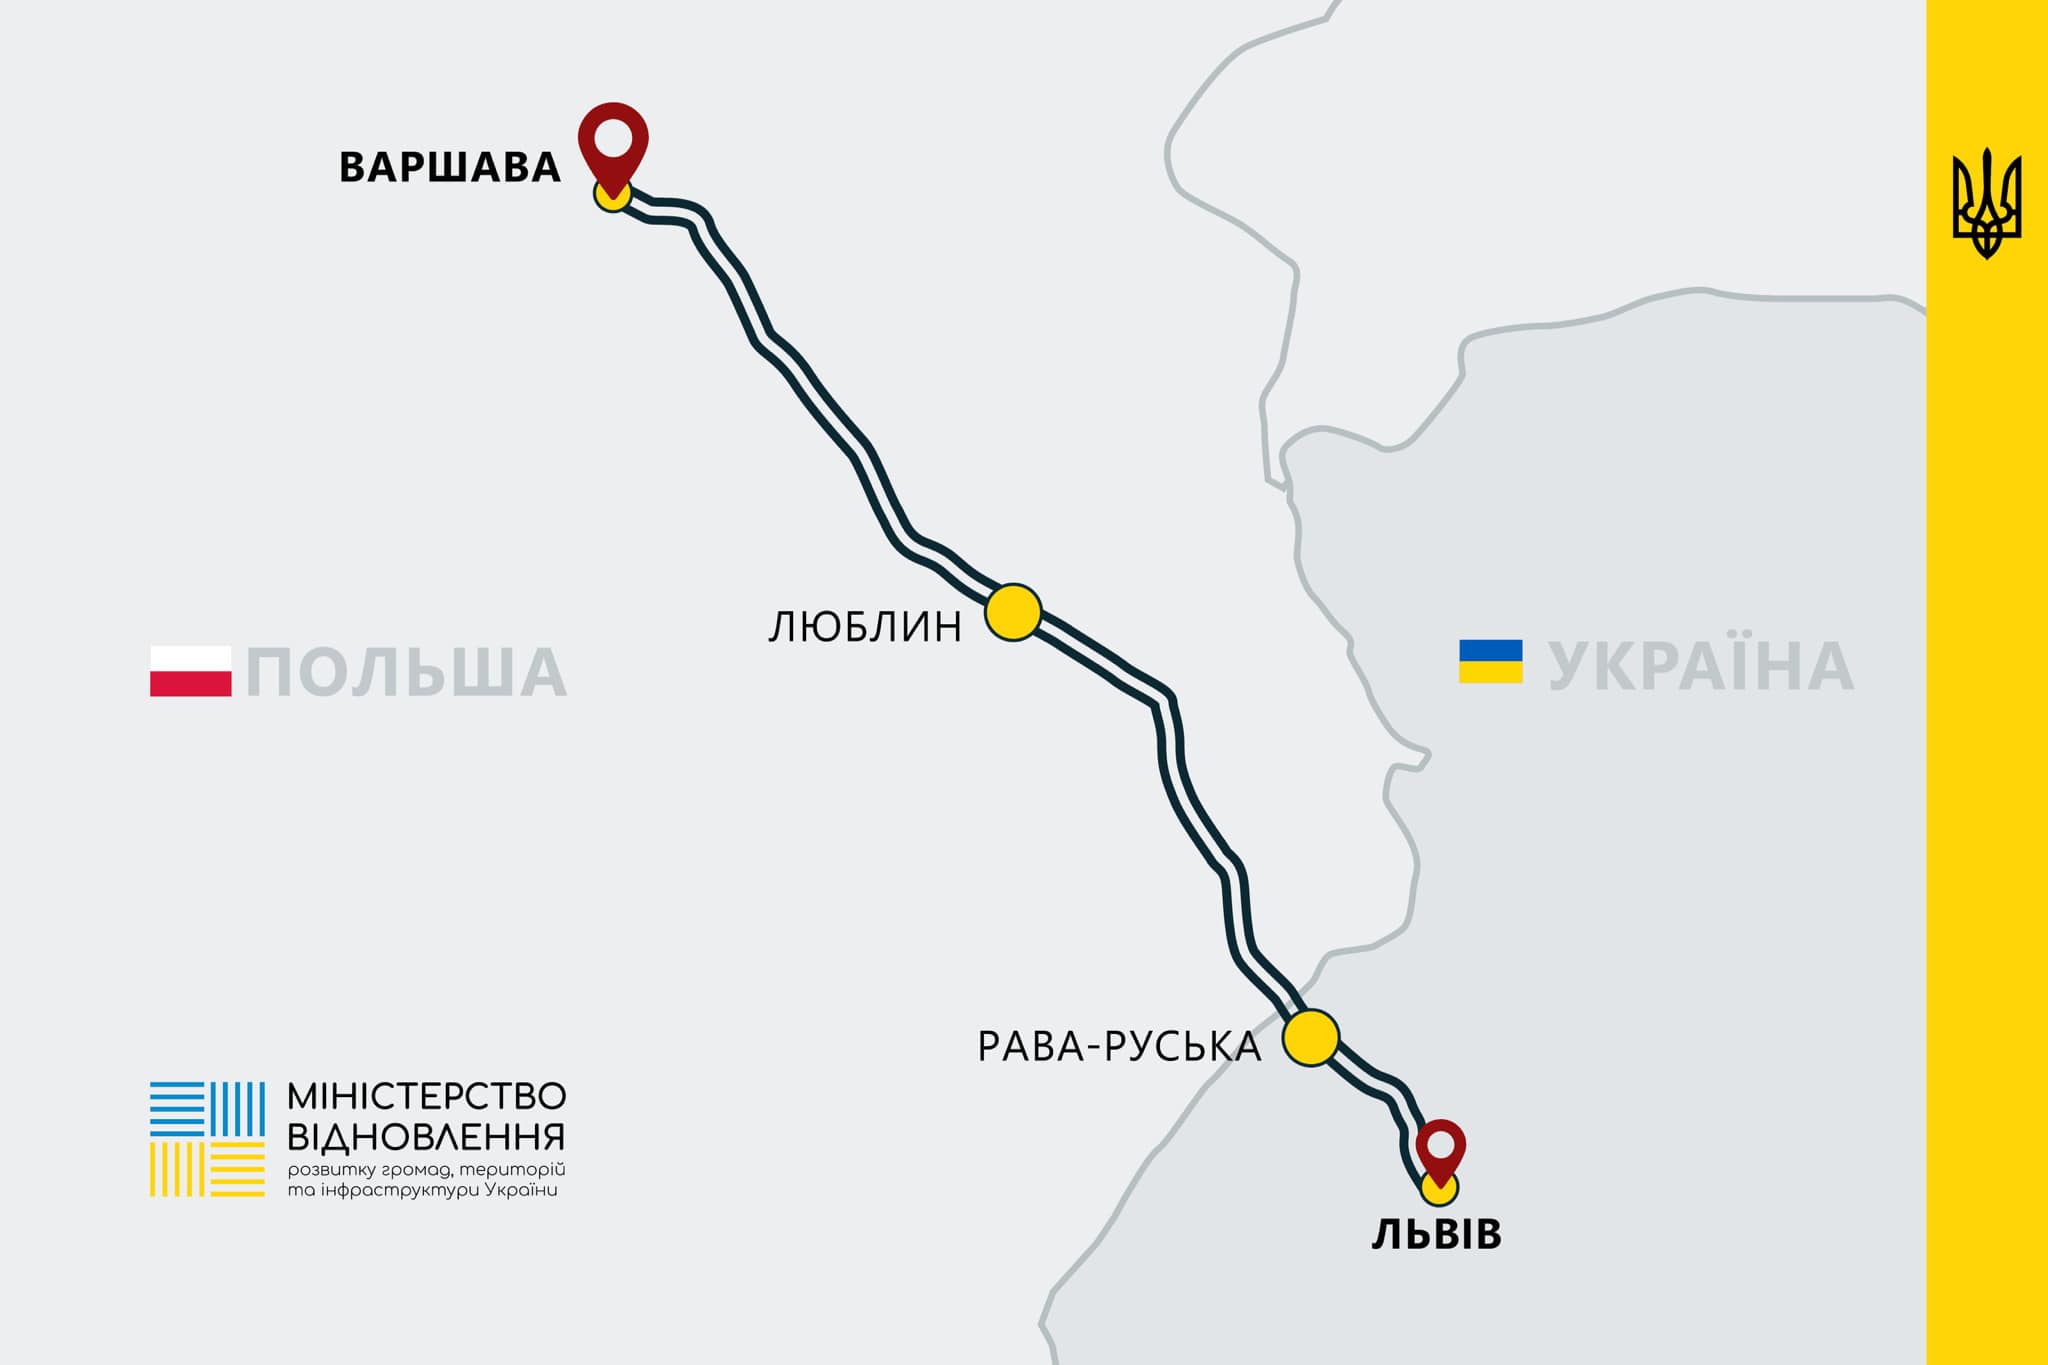 Ukraine, Poland preparing for direct railway connection between Lviv and Warsaw